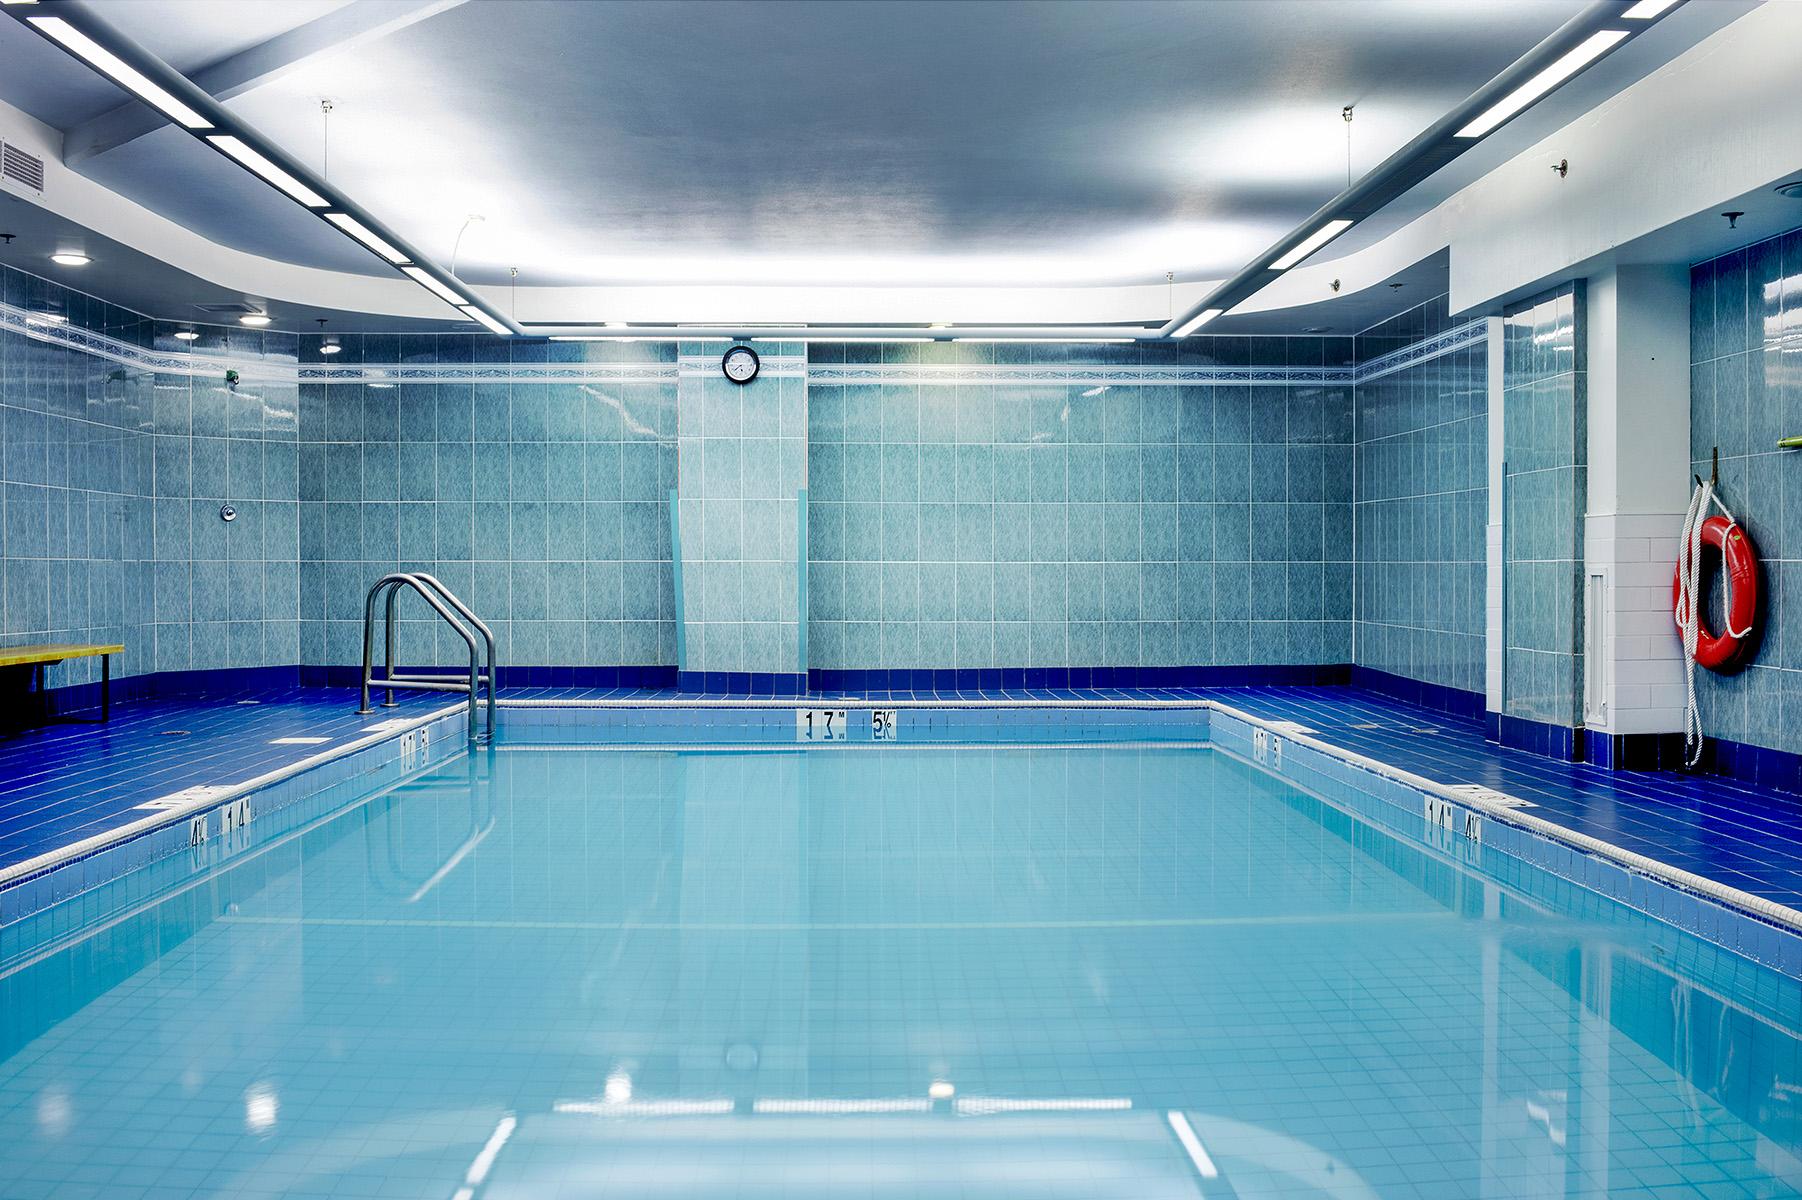 An indoor hotel swimming pool, with blue and turquoise tiles on floor and walls. Two long headlamps hanging from the ceiling, a black clock on the center wall, a wood bench on the left side, and an orange lifebuoy hanging on the right wall.